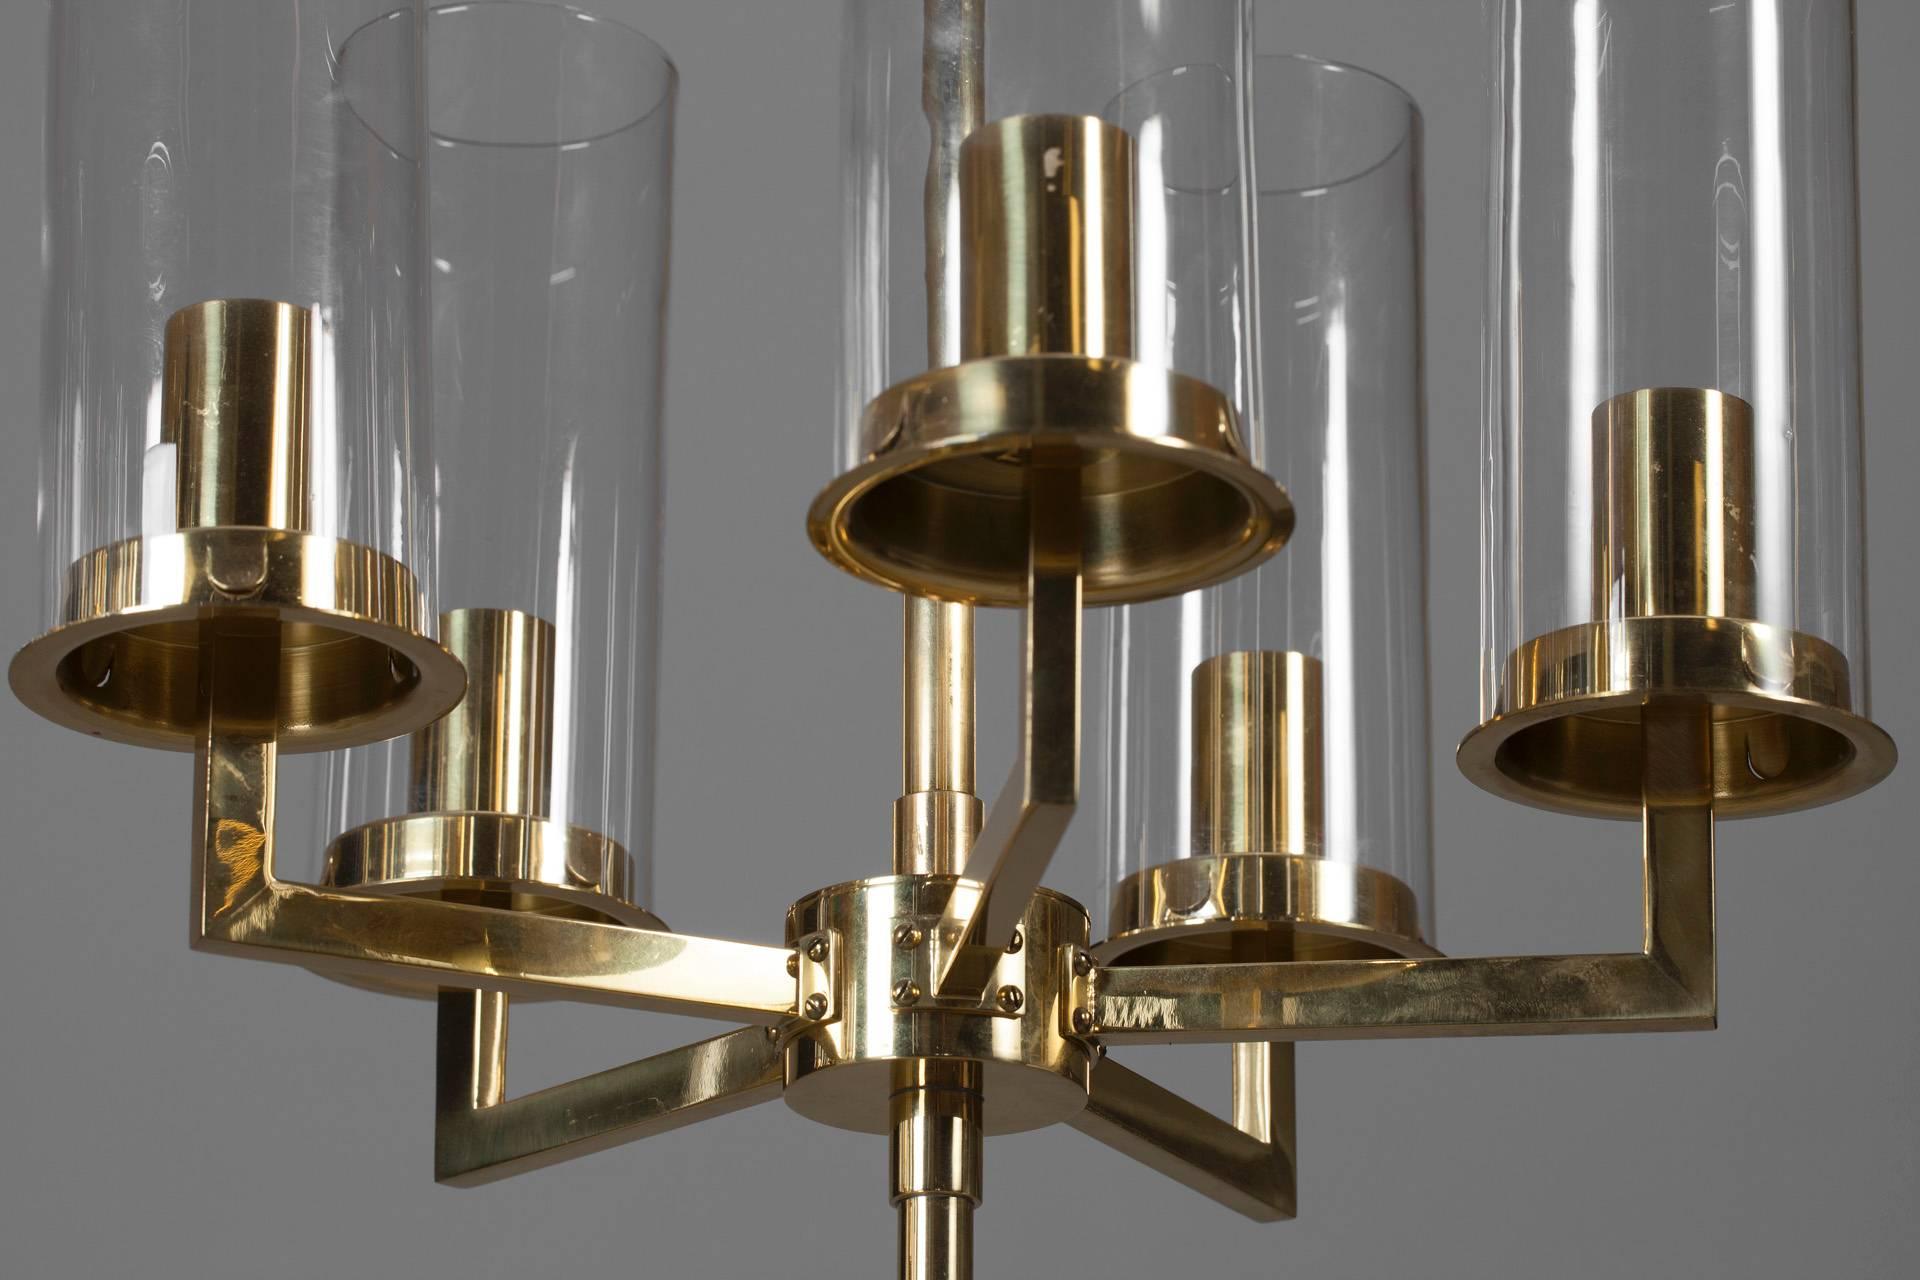 Ten lights chandelier designed by Hans Agne Jakobsson, Markaryd, Sweden. Existing wiring, rewiring available upon request. The drop may be adjusted as per customer request.